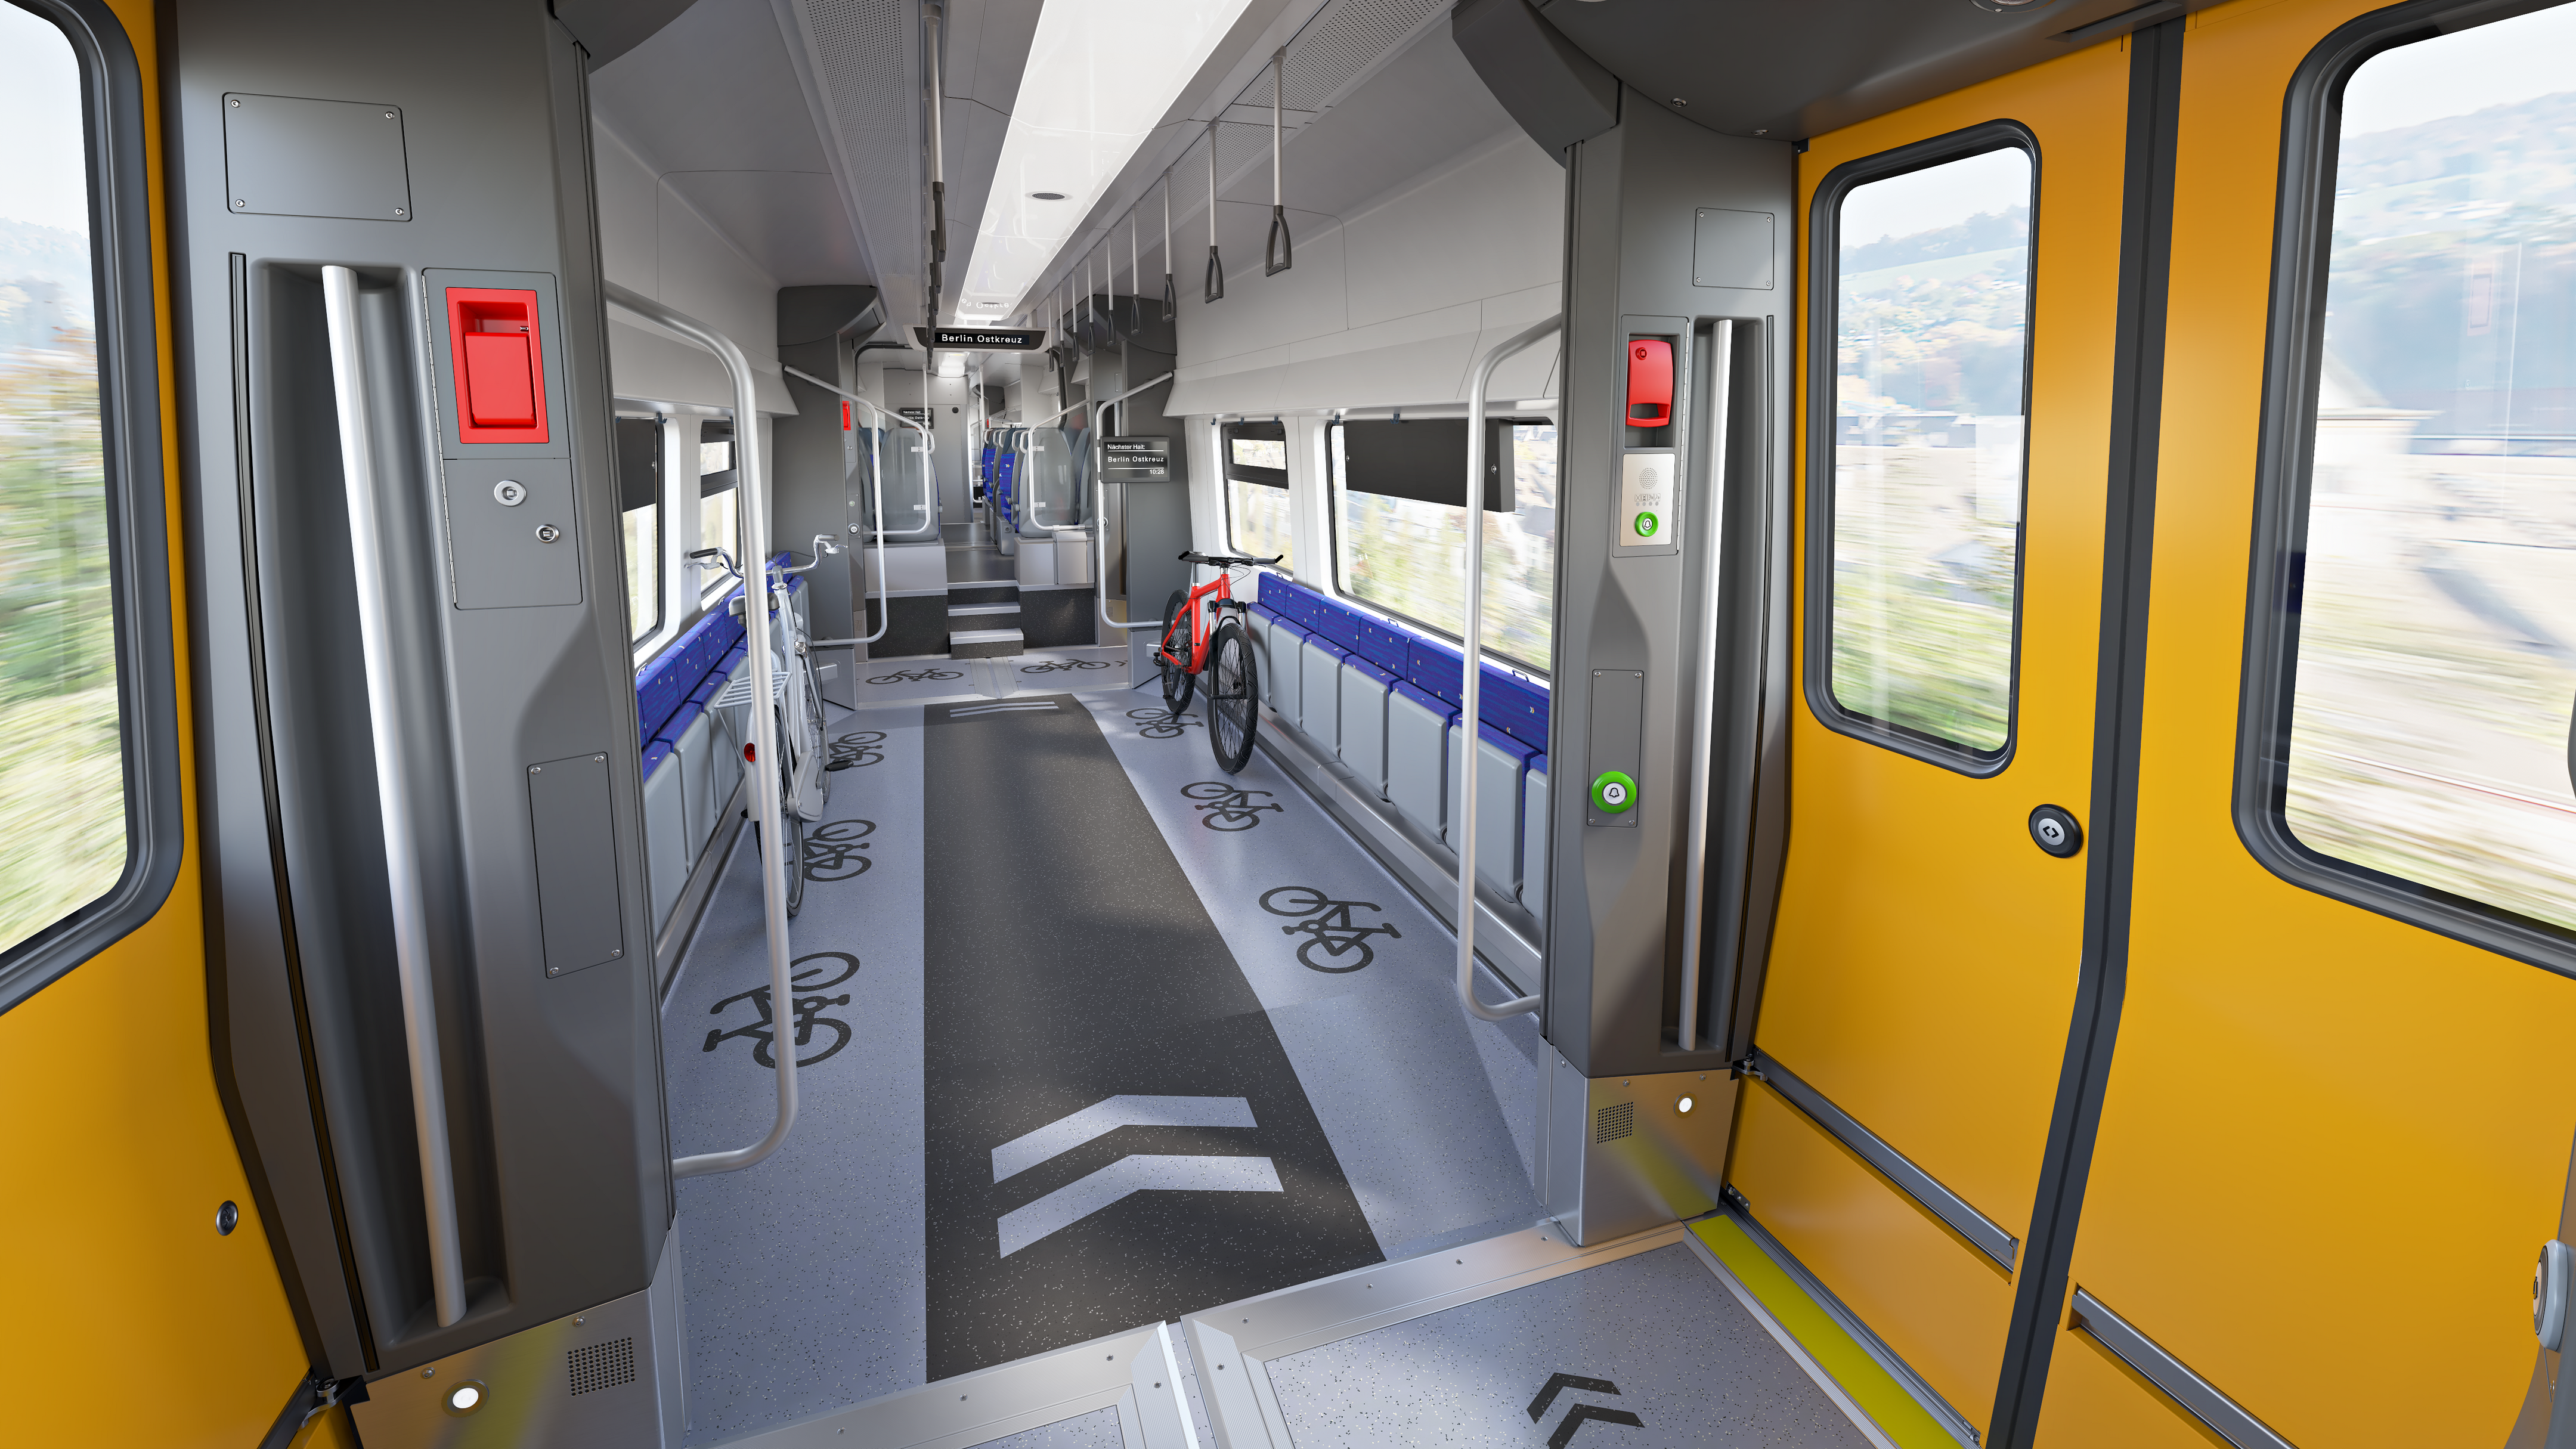 Both train types provide twelve bicycle spaces and room for two wheelchairs